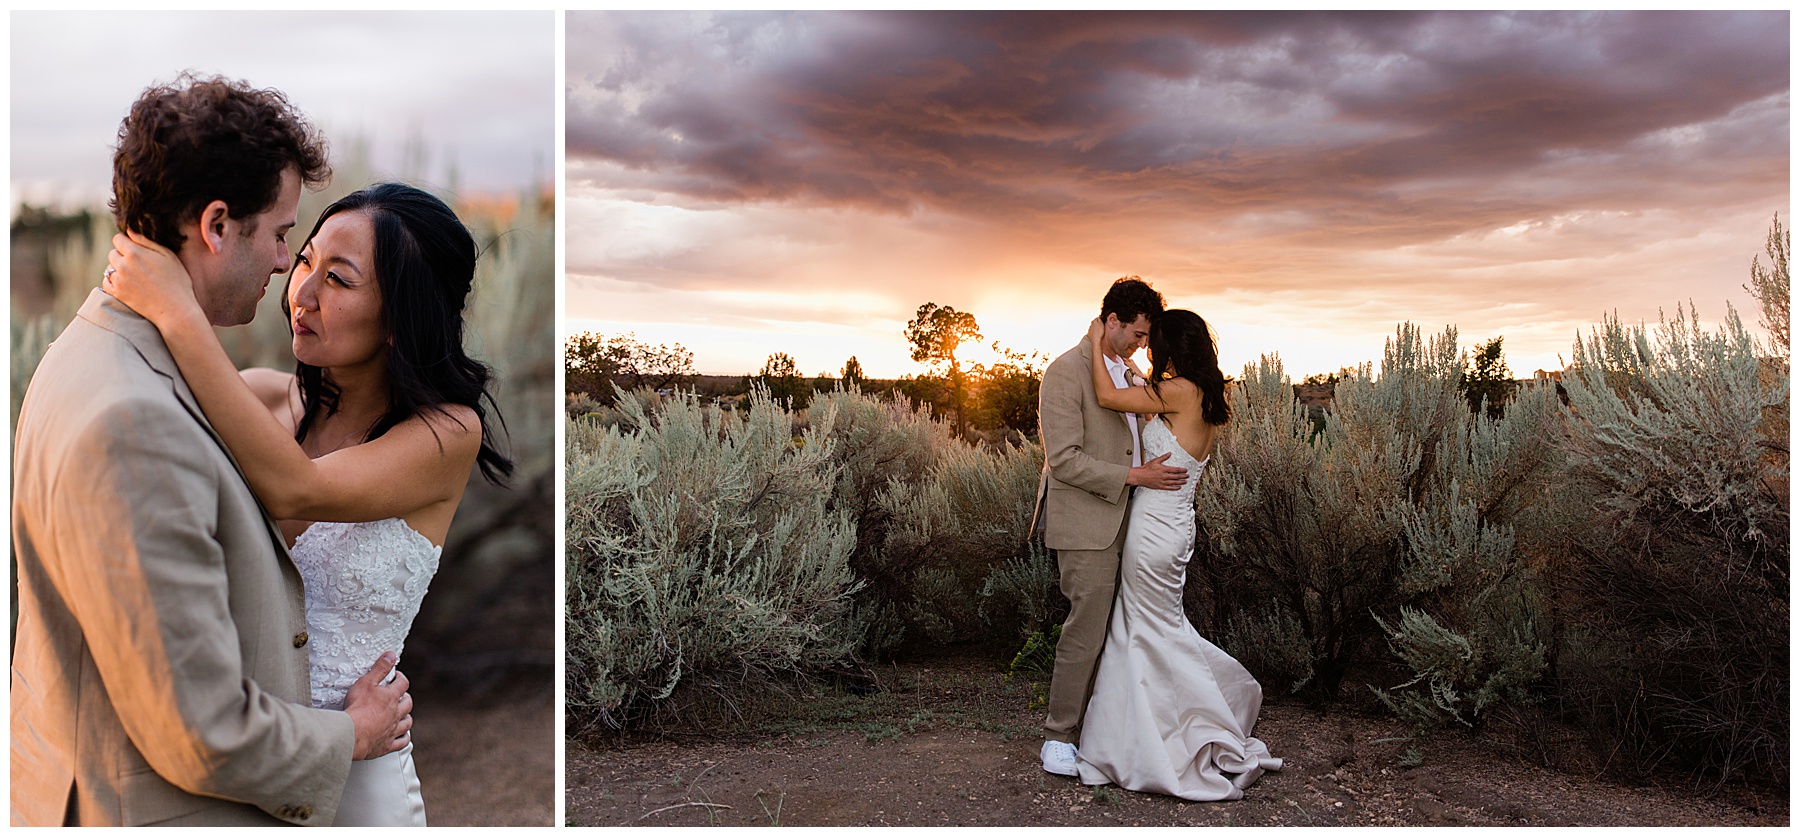 The married couple taking portraits in the tall grasses with the sun setting against gray clouds. 